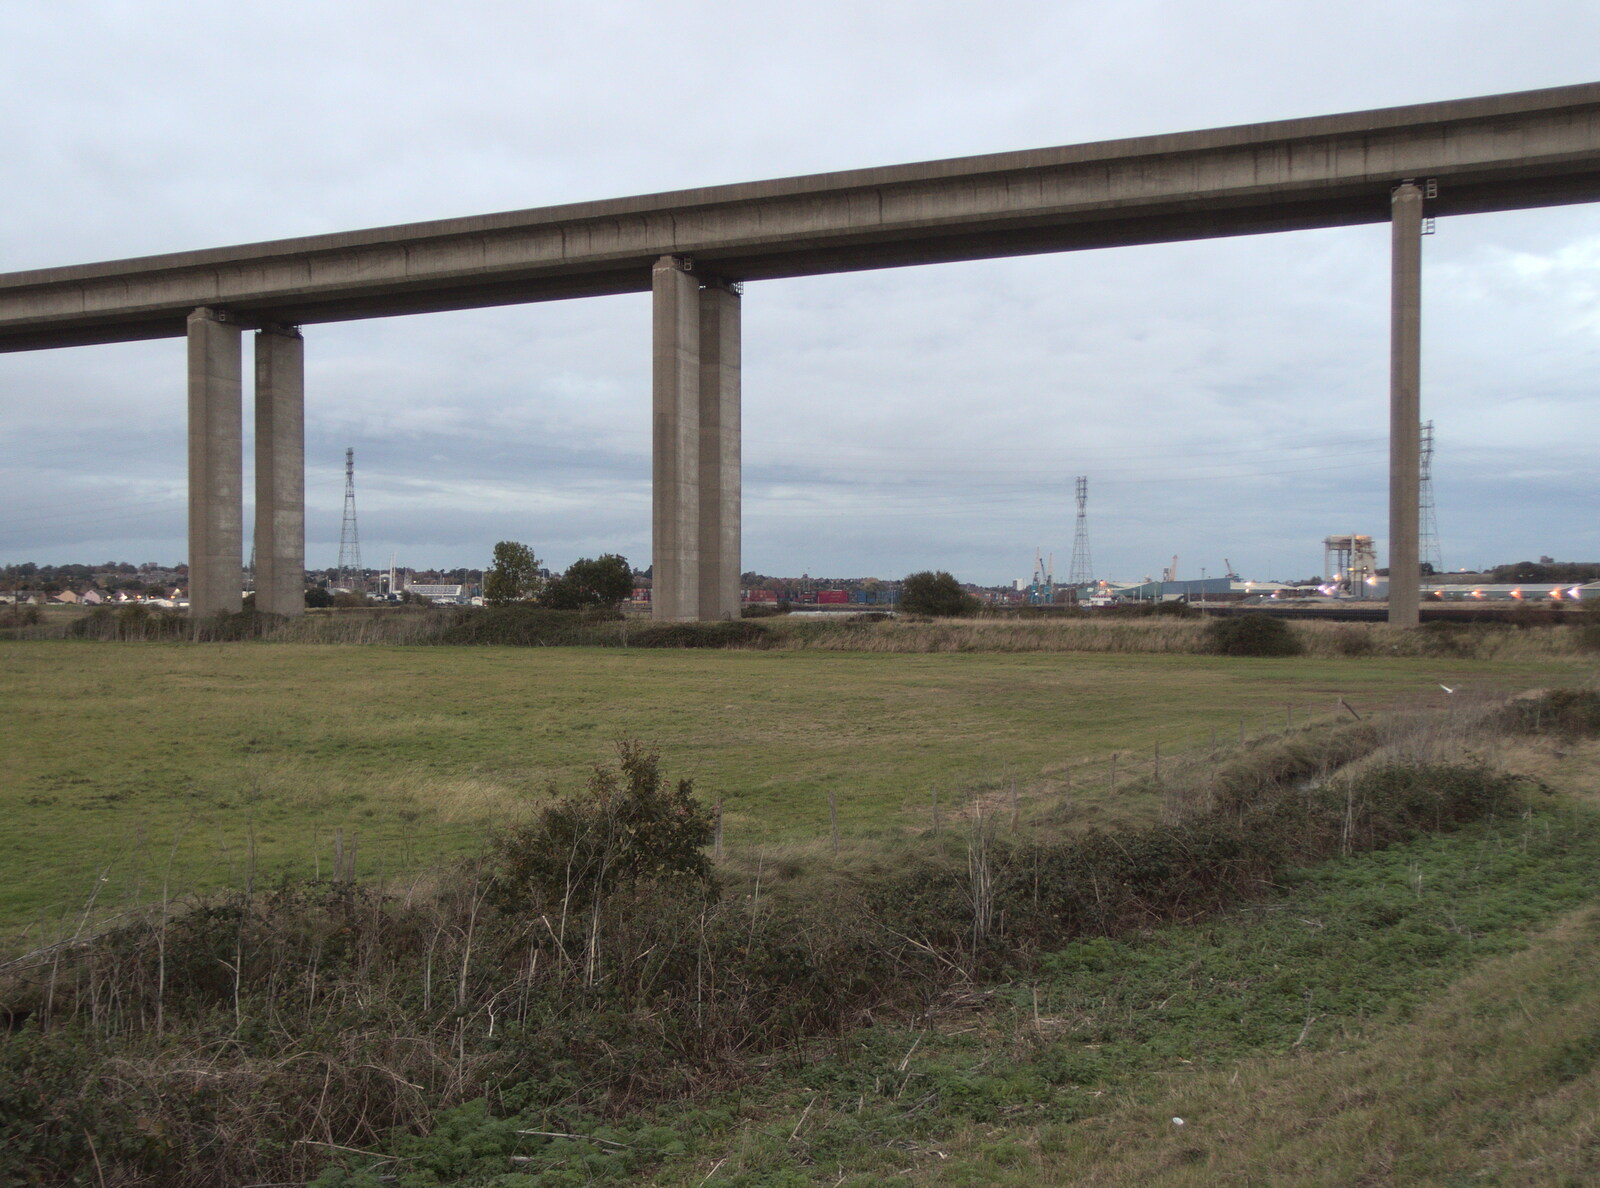 A New Playground and Container Mountain, Eye, Suffolk - 7th November 2021: The Orwell Bridge with Ipswich docks behind